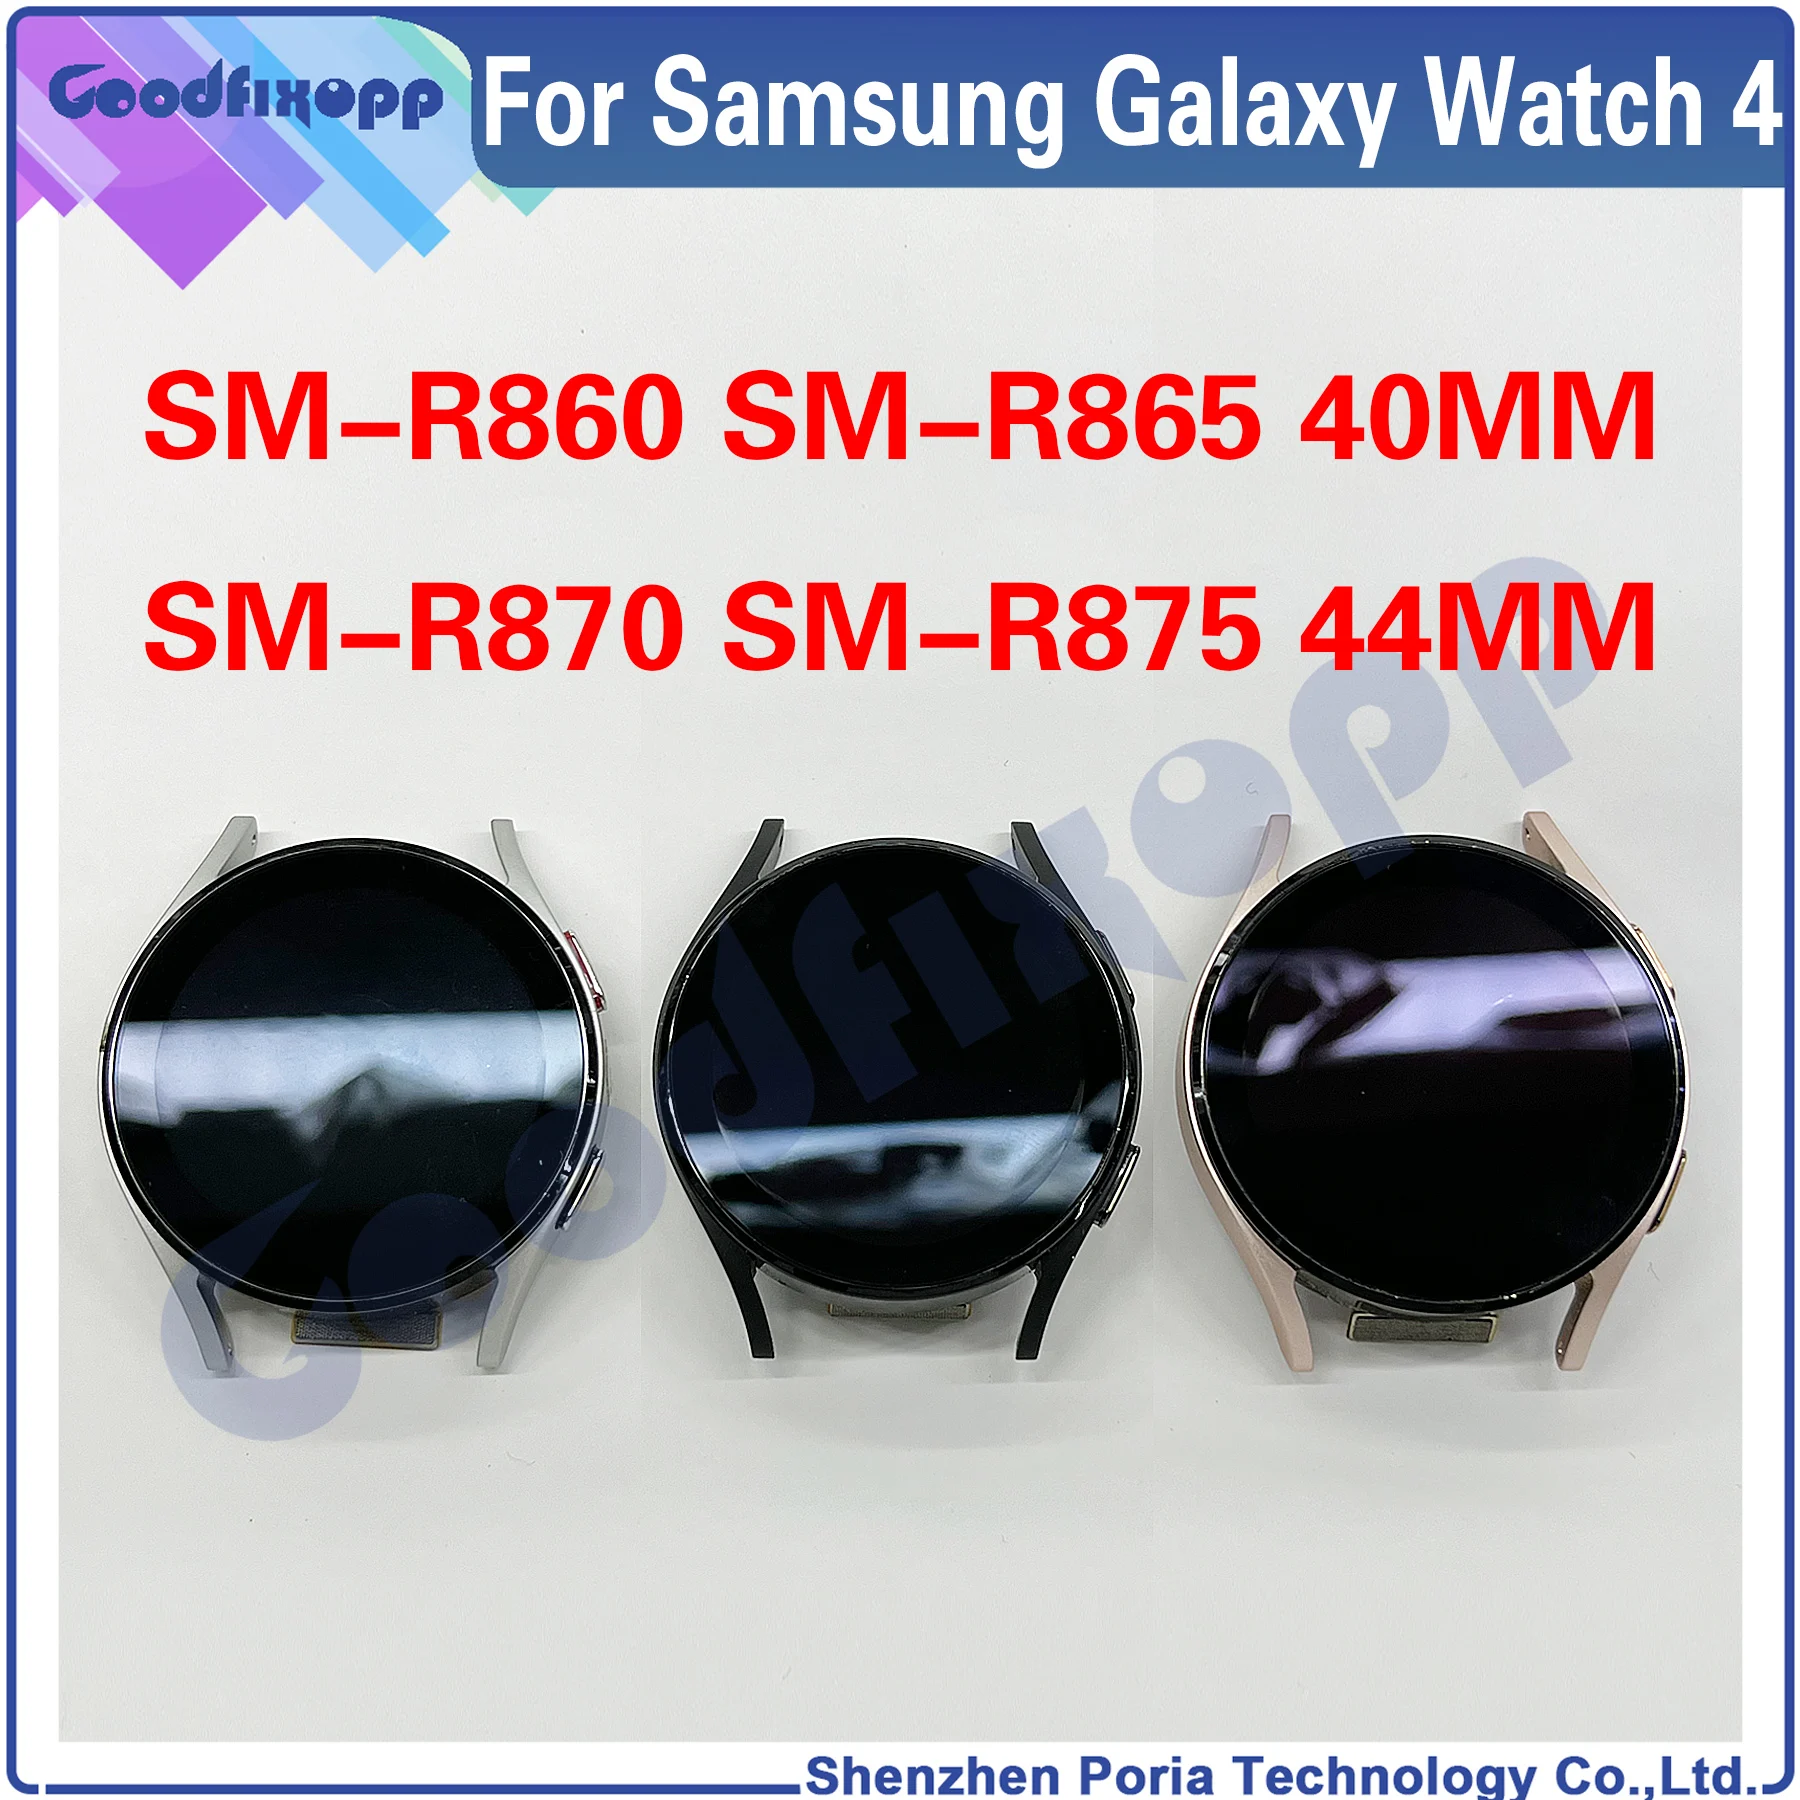 

For Samsung Watch 4 SM-R860 SM-R865 SM-R870 SM-R875 R860 R865 40MM R870 R875 44MM LCD Display Touch Screen Digitizer Assembly